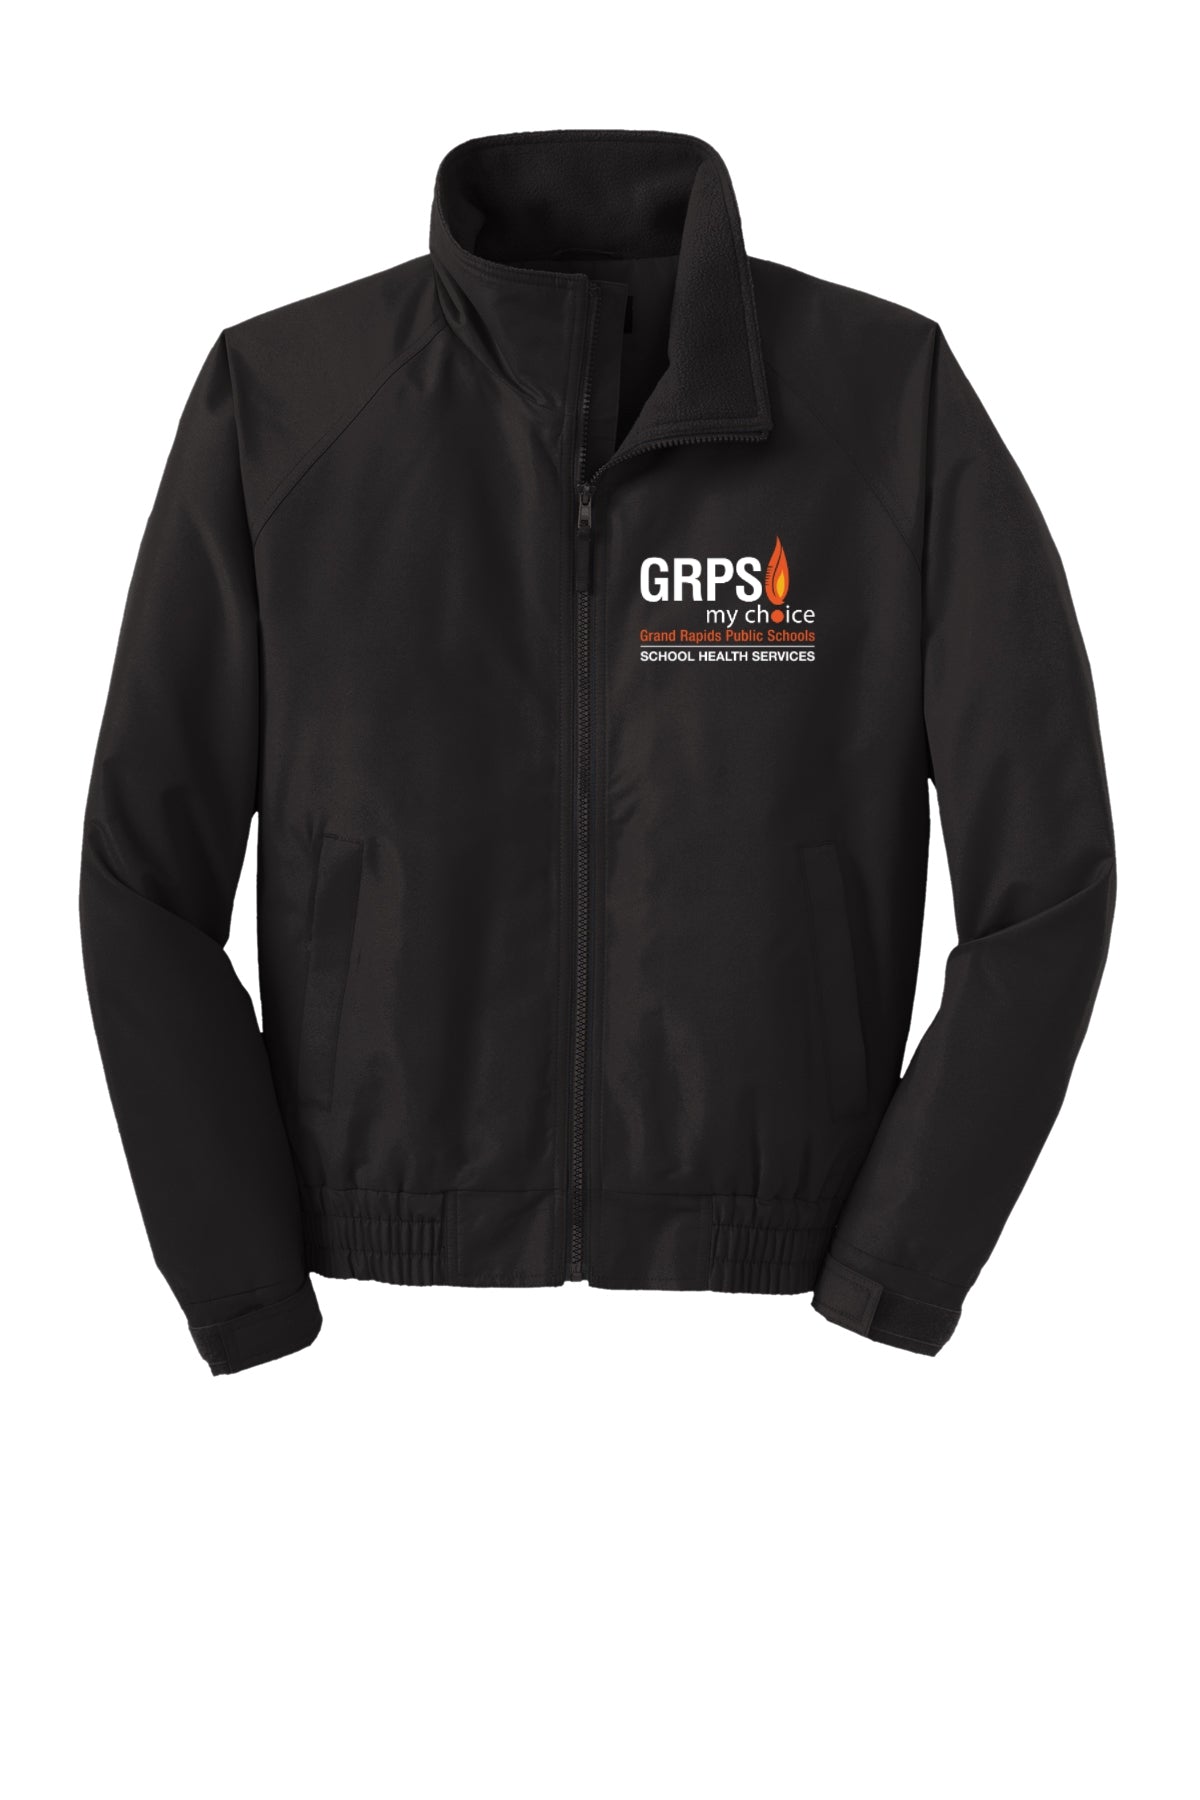 GRPS HEALTH SERVICES Lightweight Charger Jacket